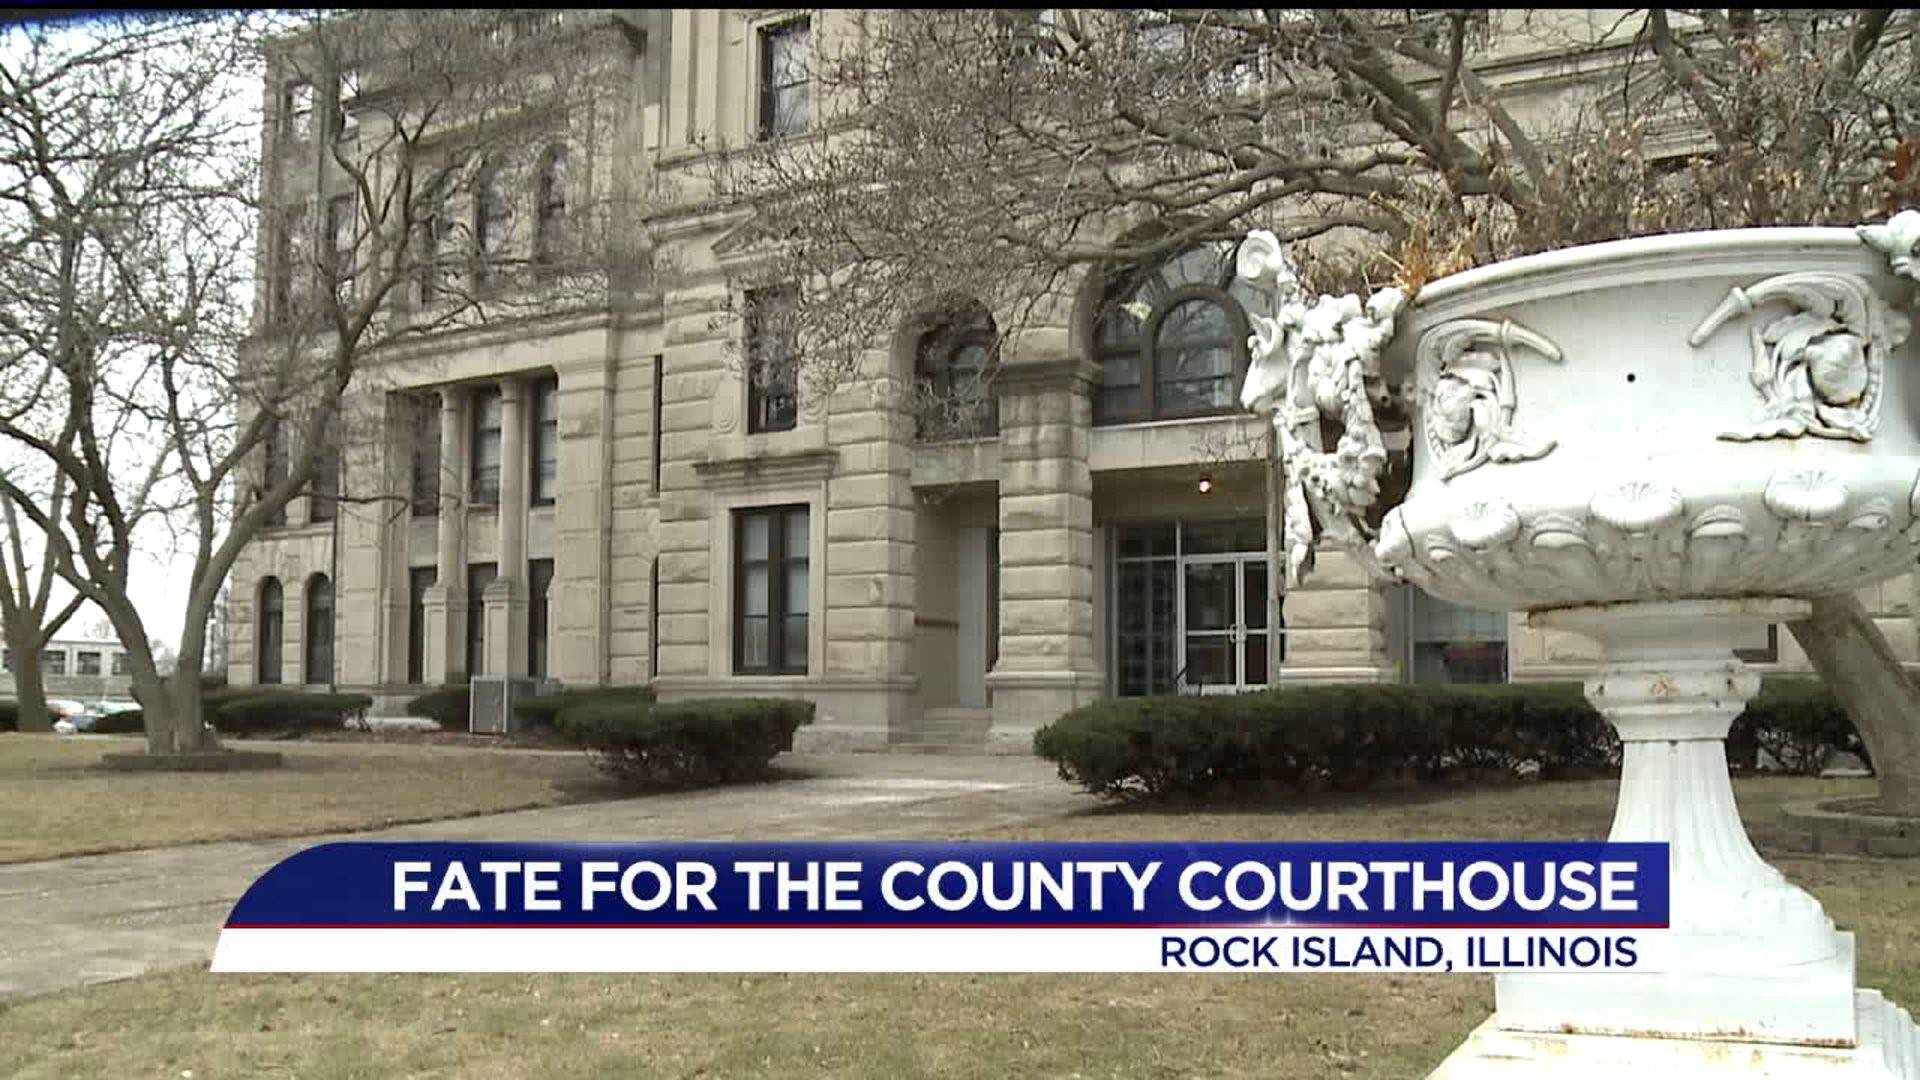 What will happen to the RICO courthouse?